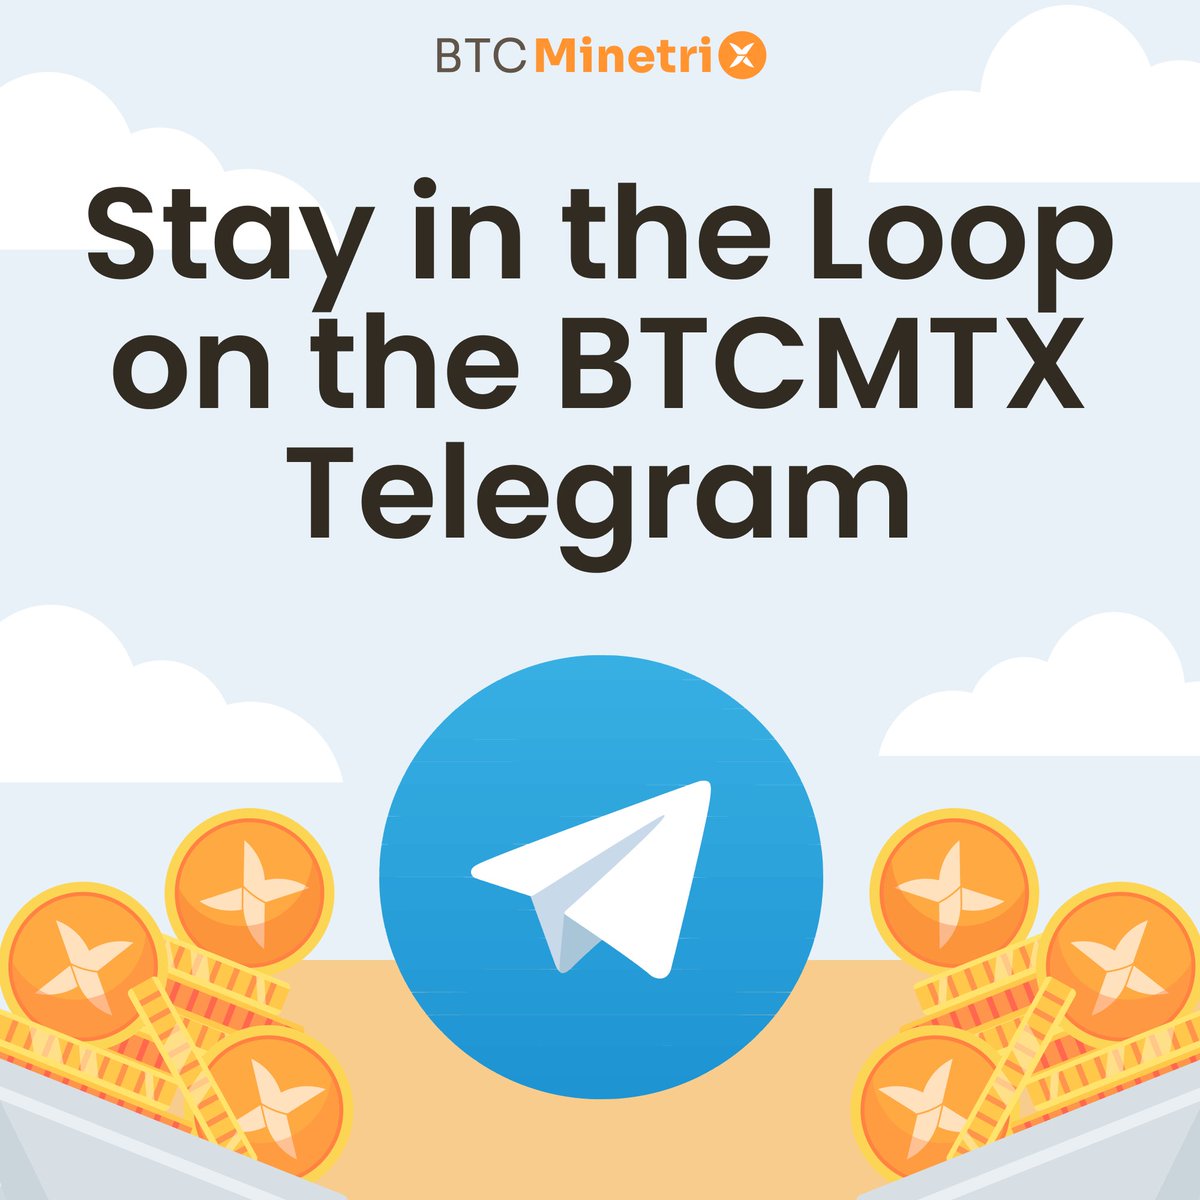 Join the #BTCMTX #Telegram and explore the latest developments in #Bitcoin cloud mining! ⛏️ Stay in the loop with live notifications, participate in discussions, and tap into the knowledge of experienced #BTC mining aficionados. 📈 Connect with us at 🔗 t.me/bitcoinminetrix